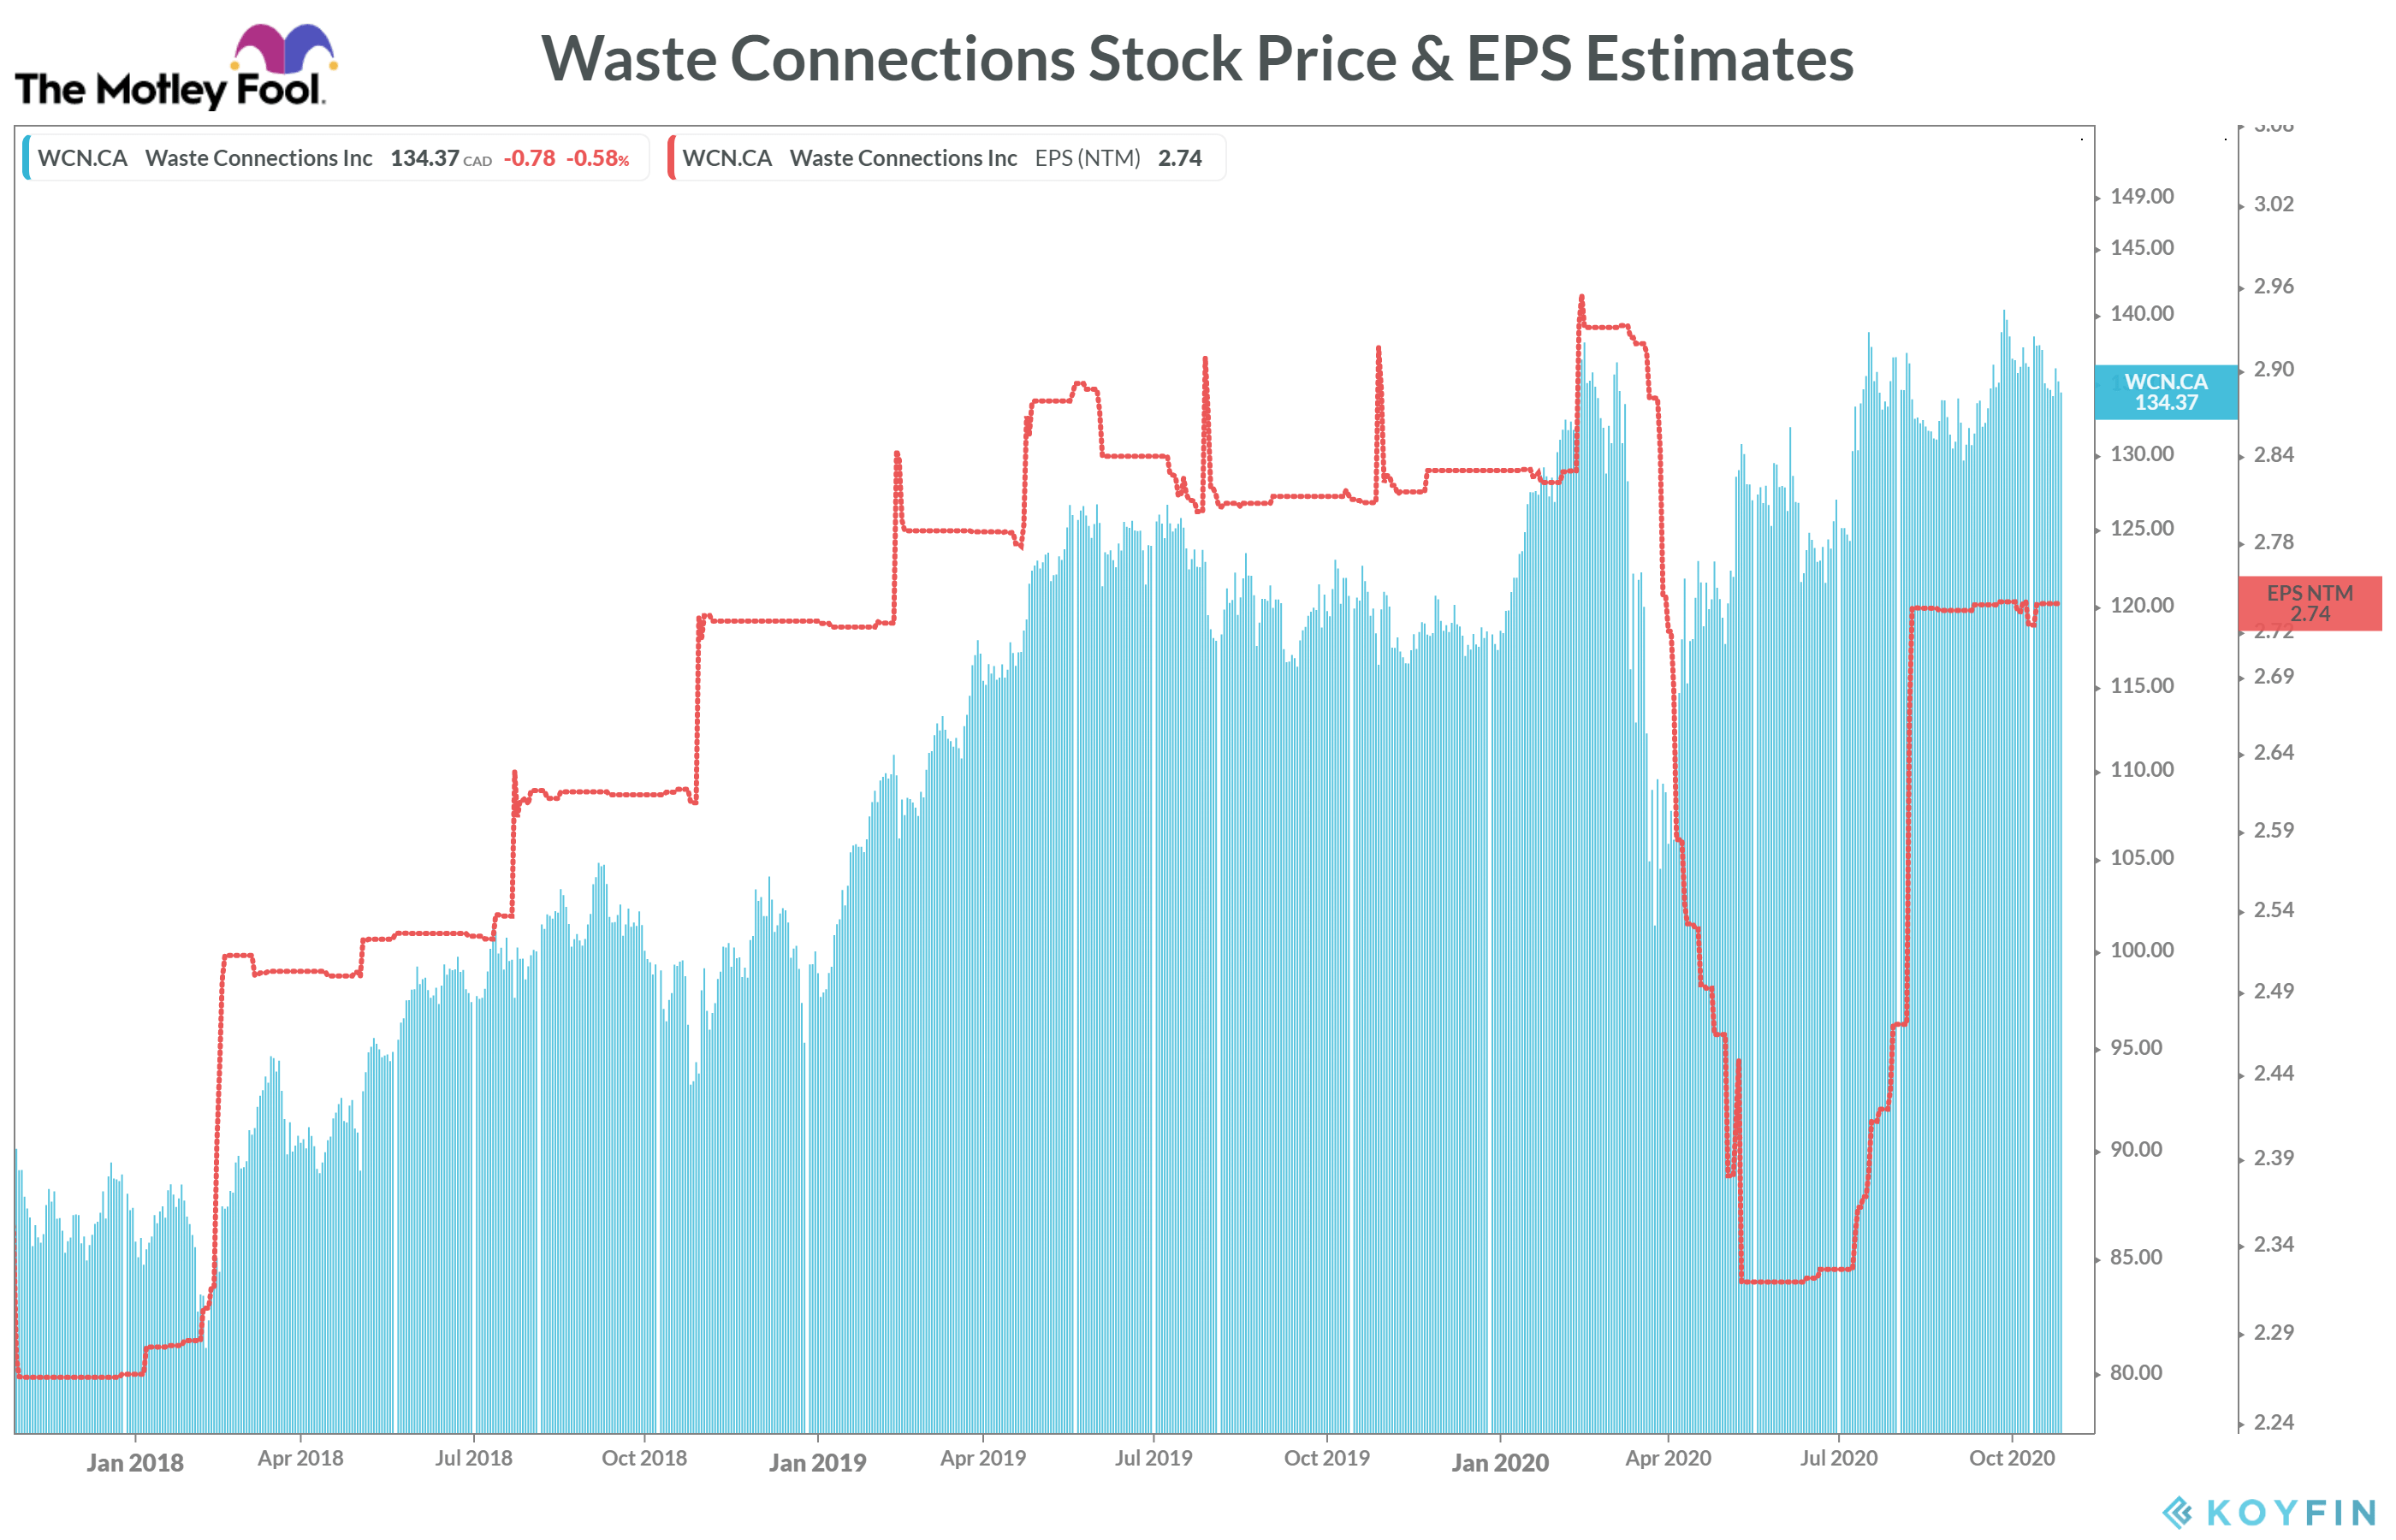 Waste Connections stock